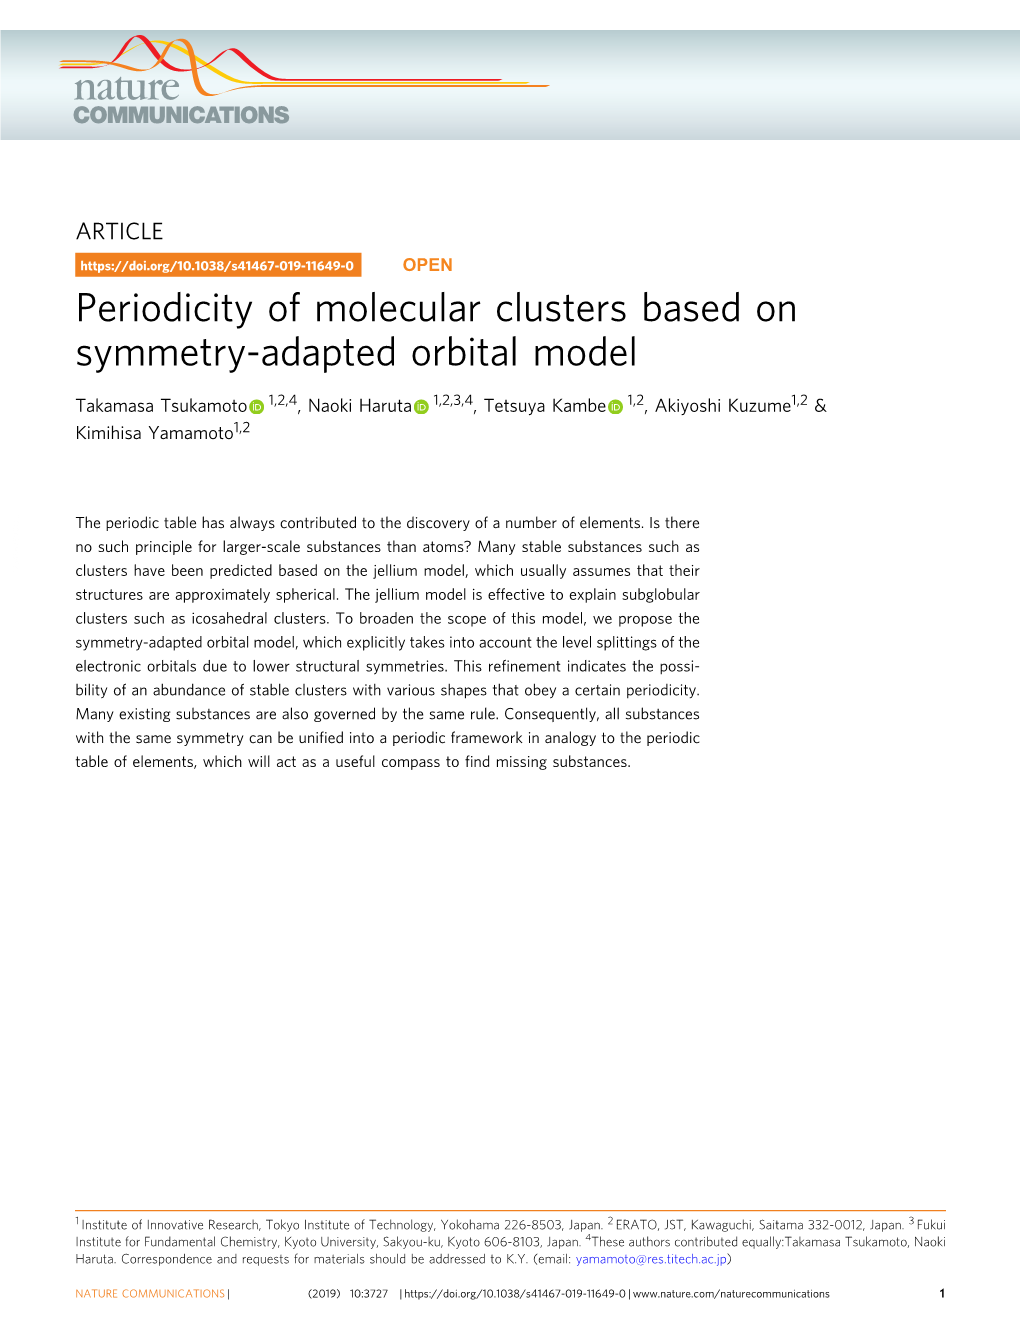 Periodicity of Molecular Clusters Based on Symmetry-Adapted Orbital Model